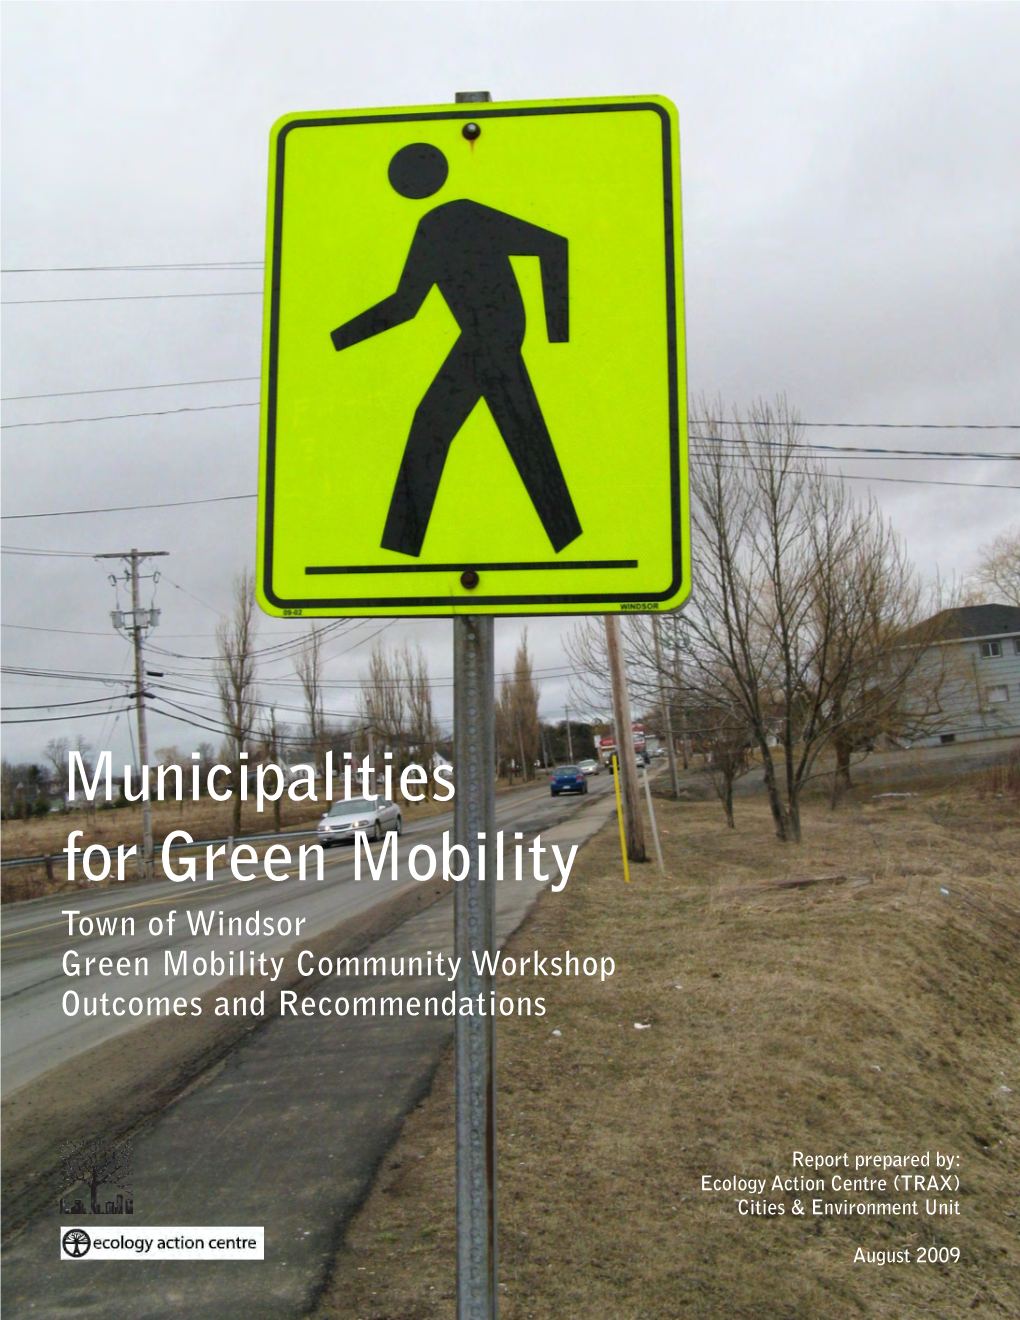 Windsor Green Mobility Community Workshop Outcomes and Recommendations